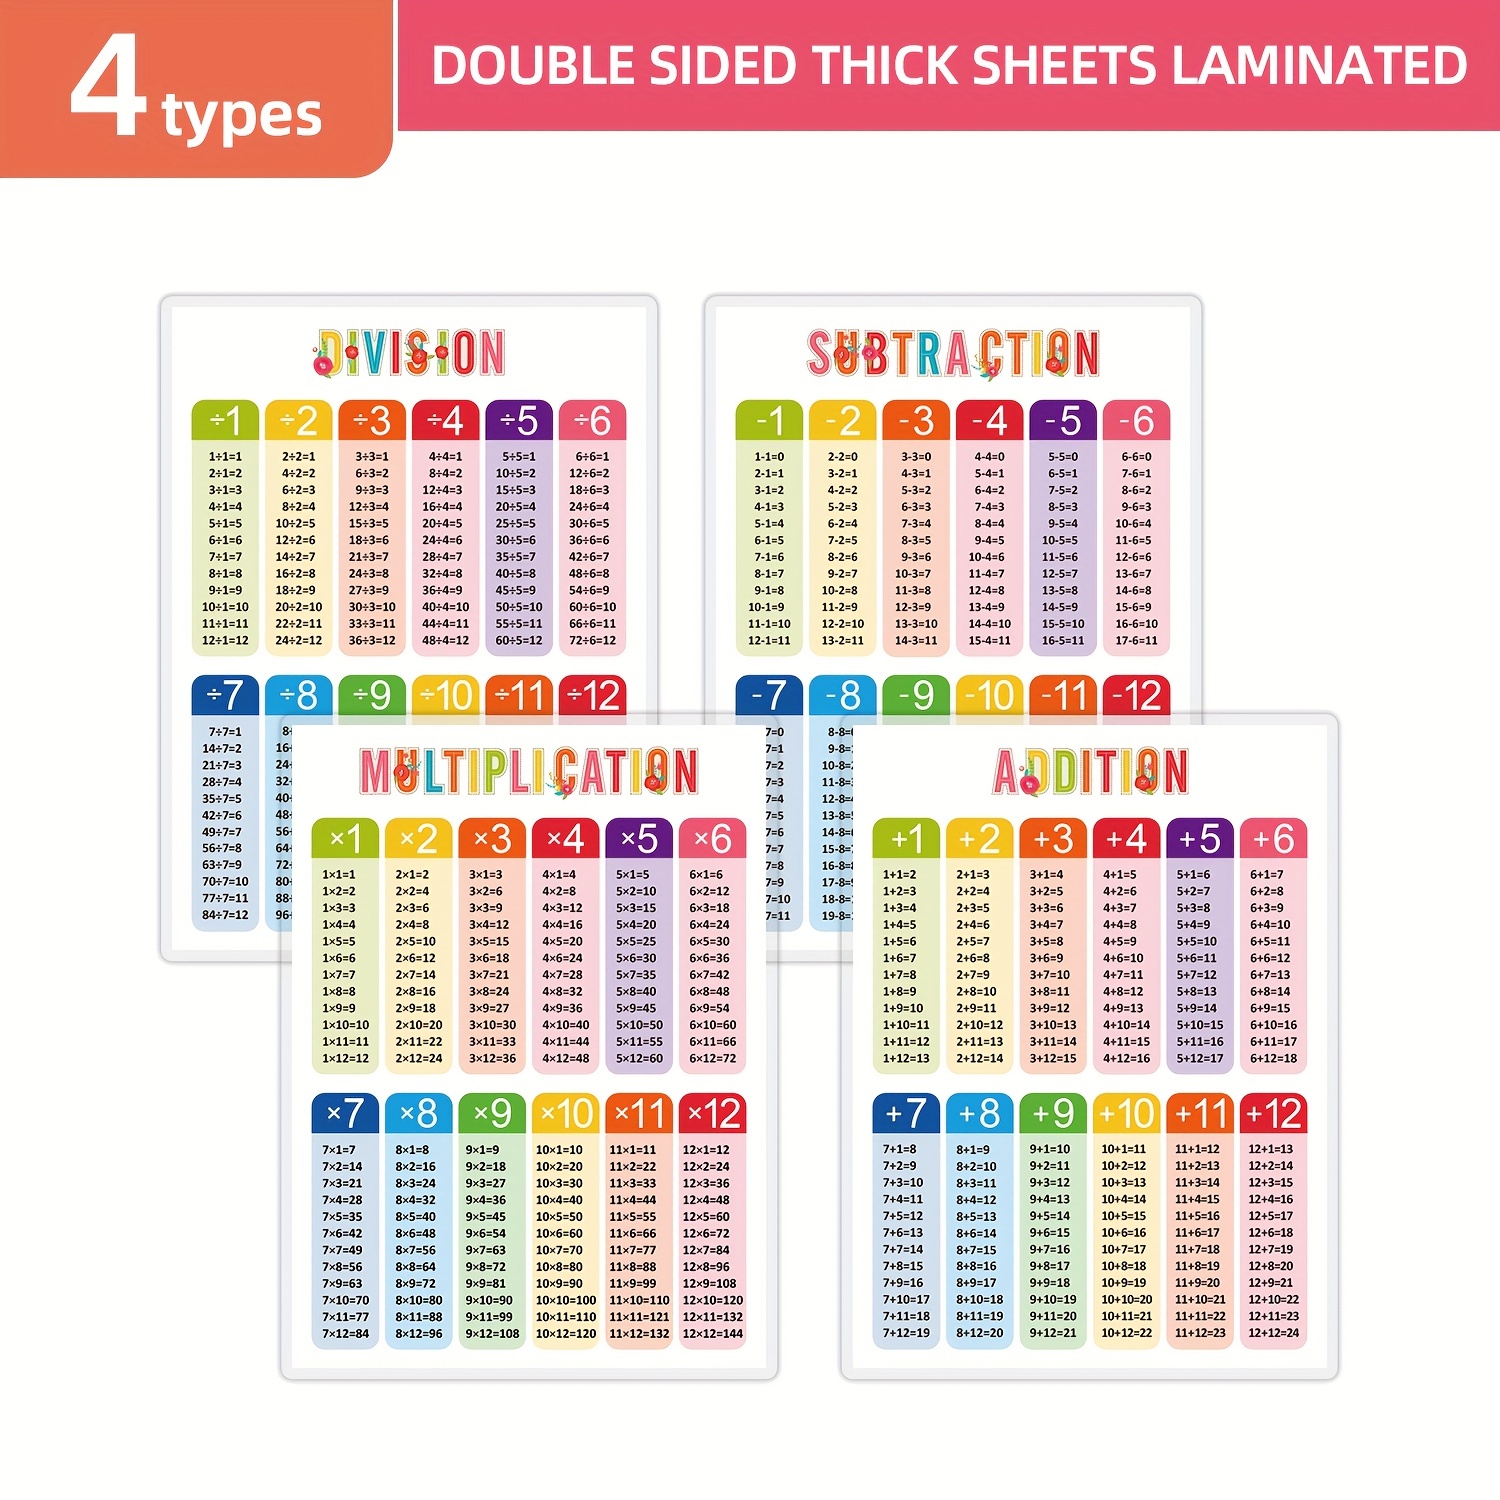 Multiplication Table Chart Poster - LAMINATED 17 x 22